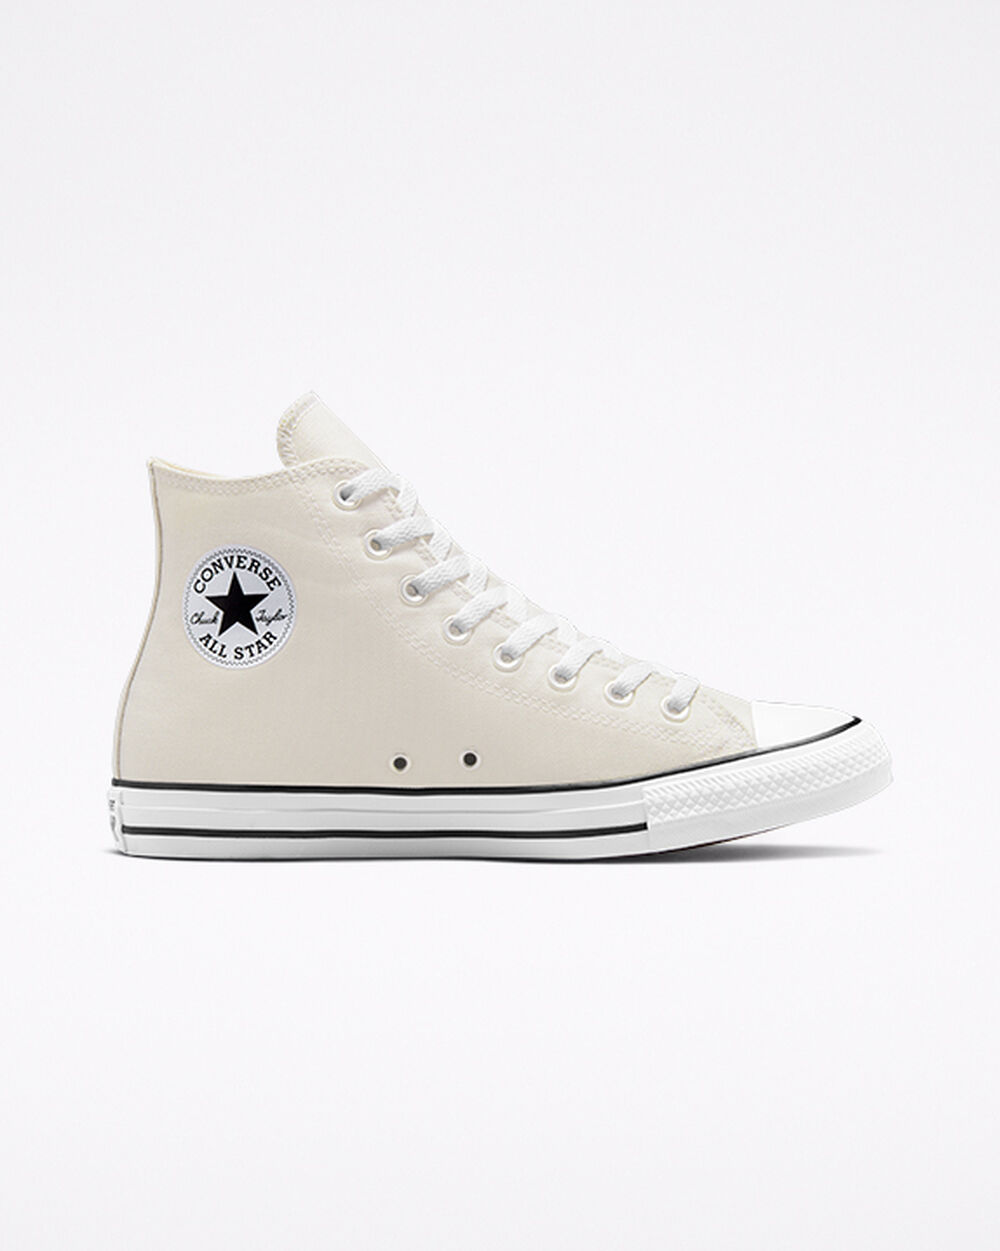 Tenis Converse Chuck Taylor All Star Mujer Beige | Mexico-066256